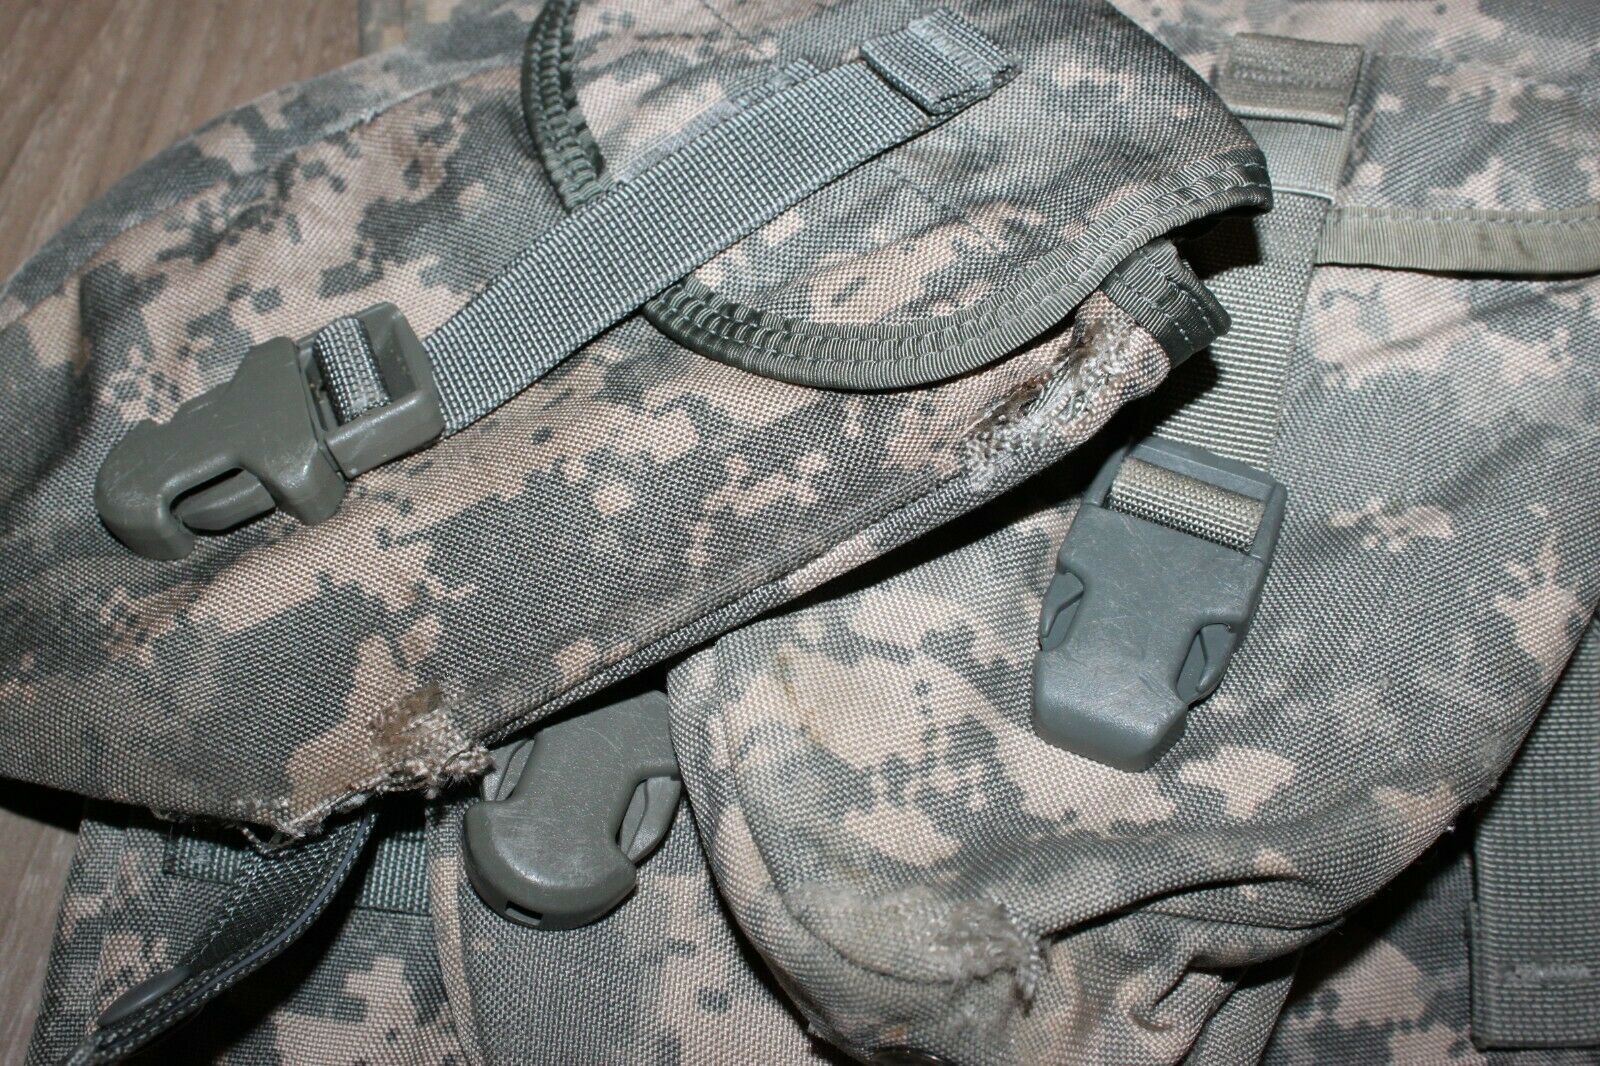 (2) MOLLE Entrenching E-Tool Carrier Pouch ACU Camo Utility Fanny Pack USA Damage